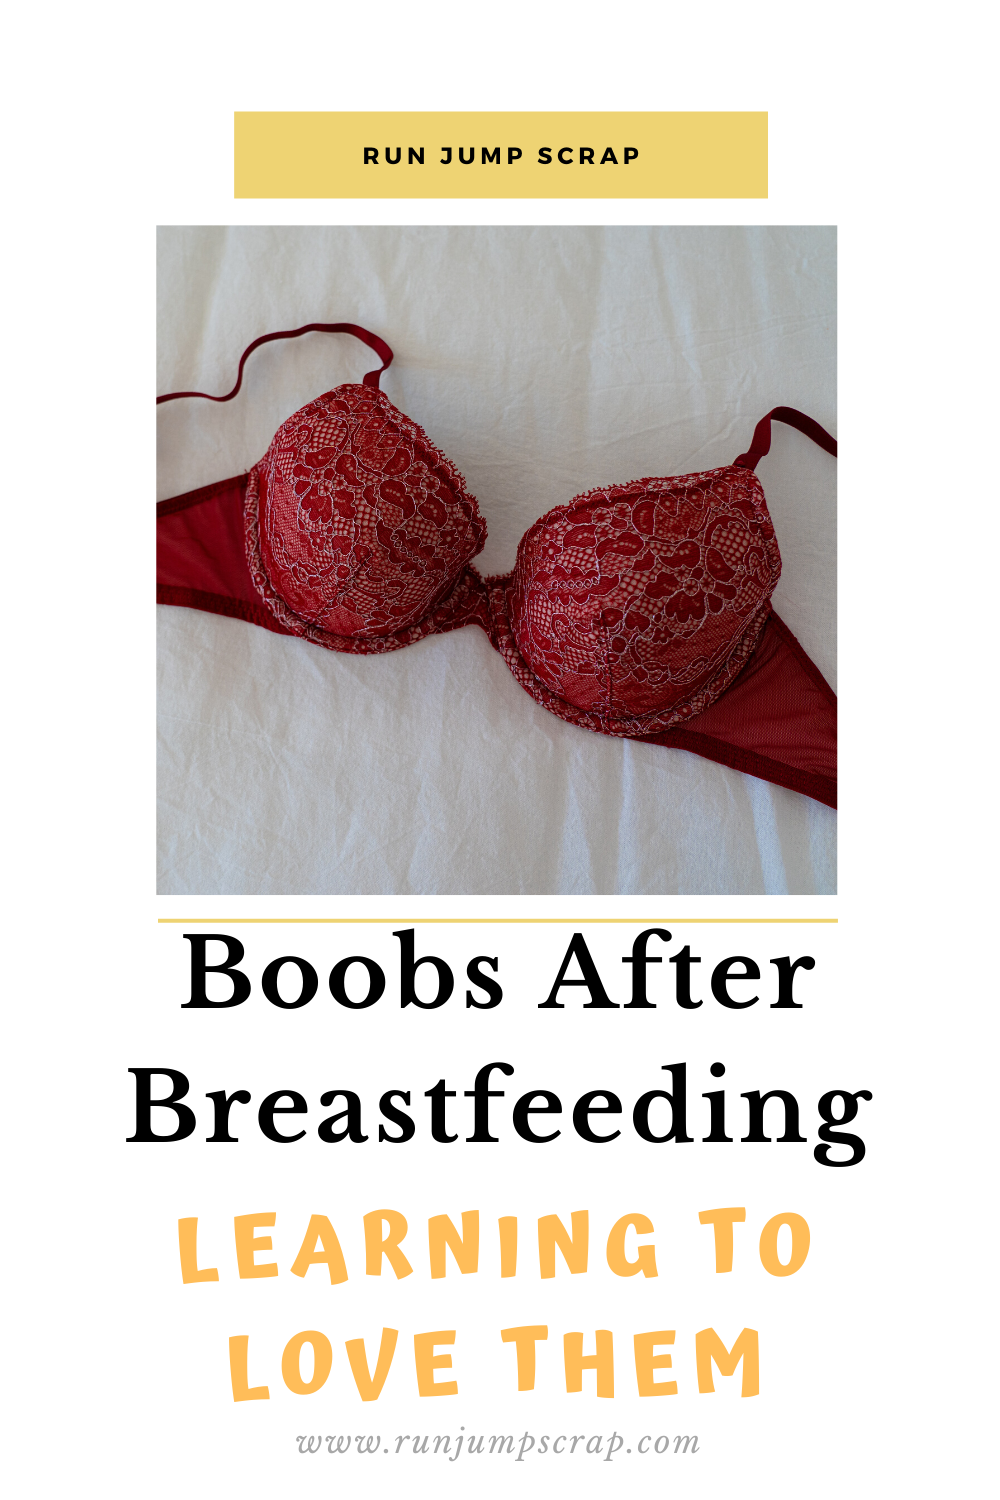 boobs after breastfeeding - learning to love them